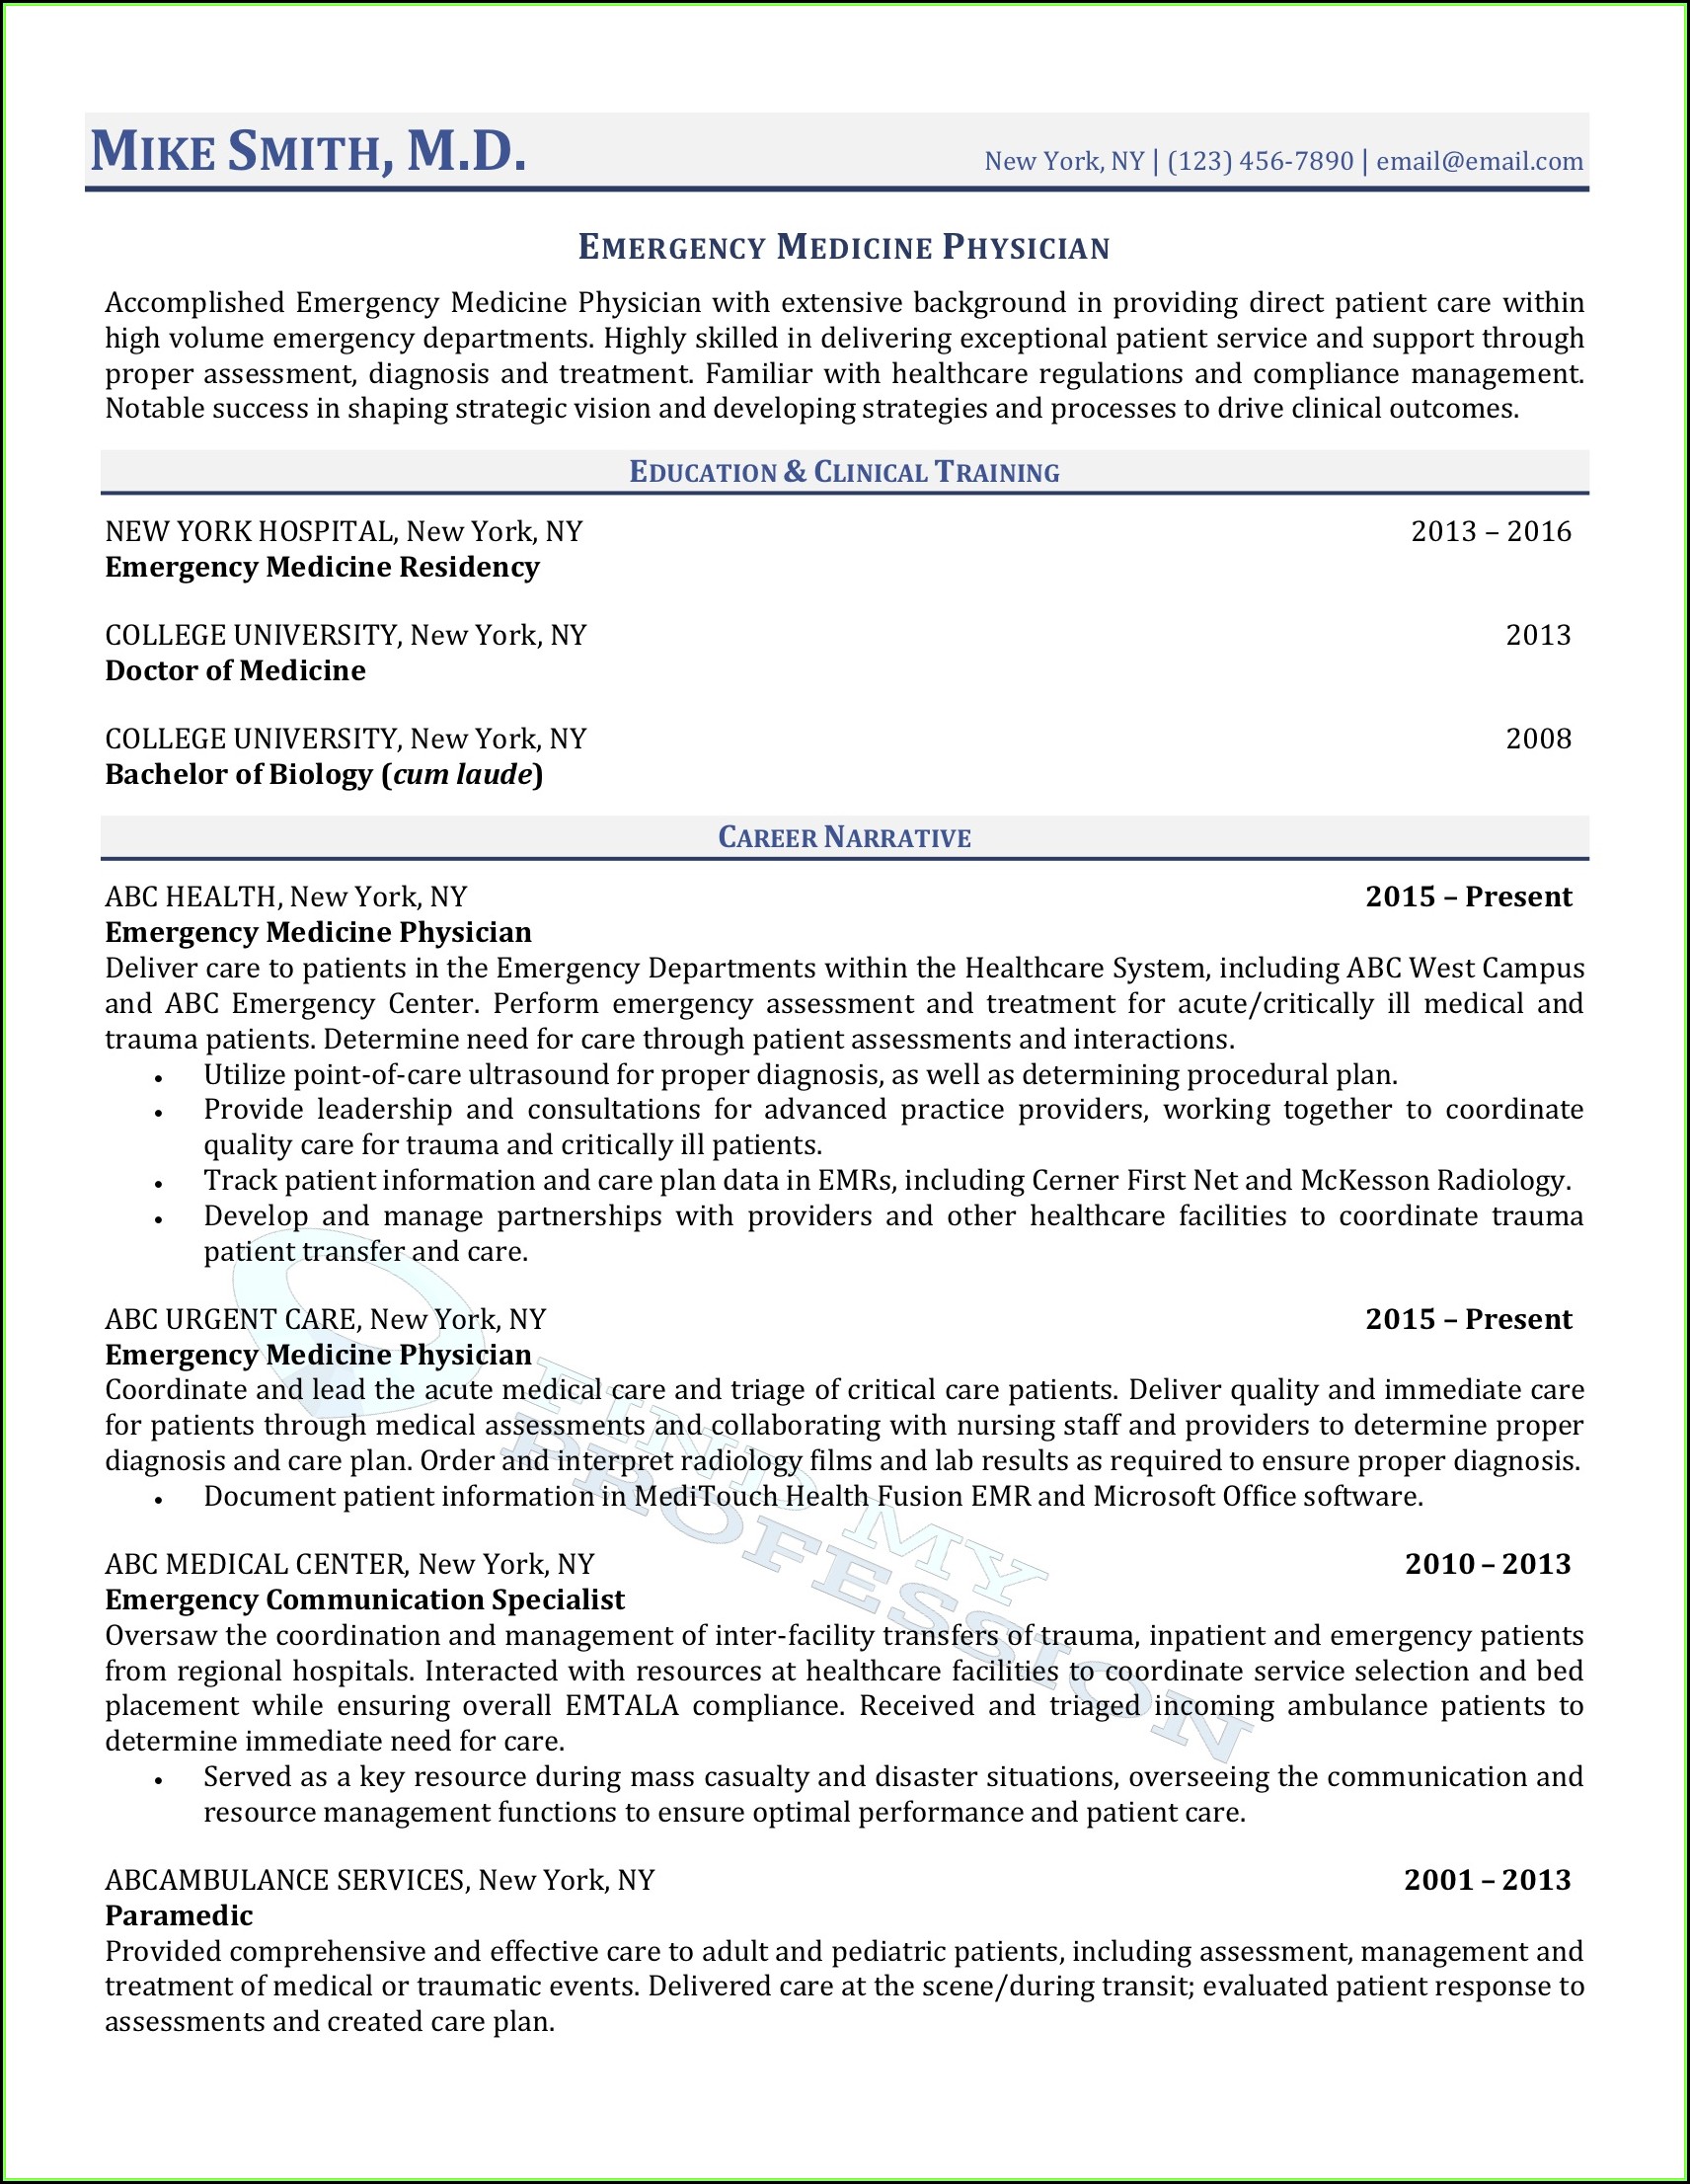 Medical Device Resume Writers